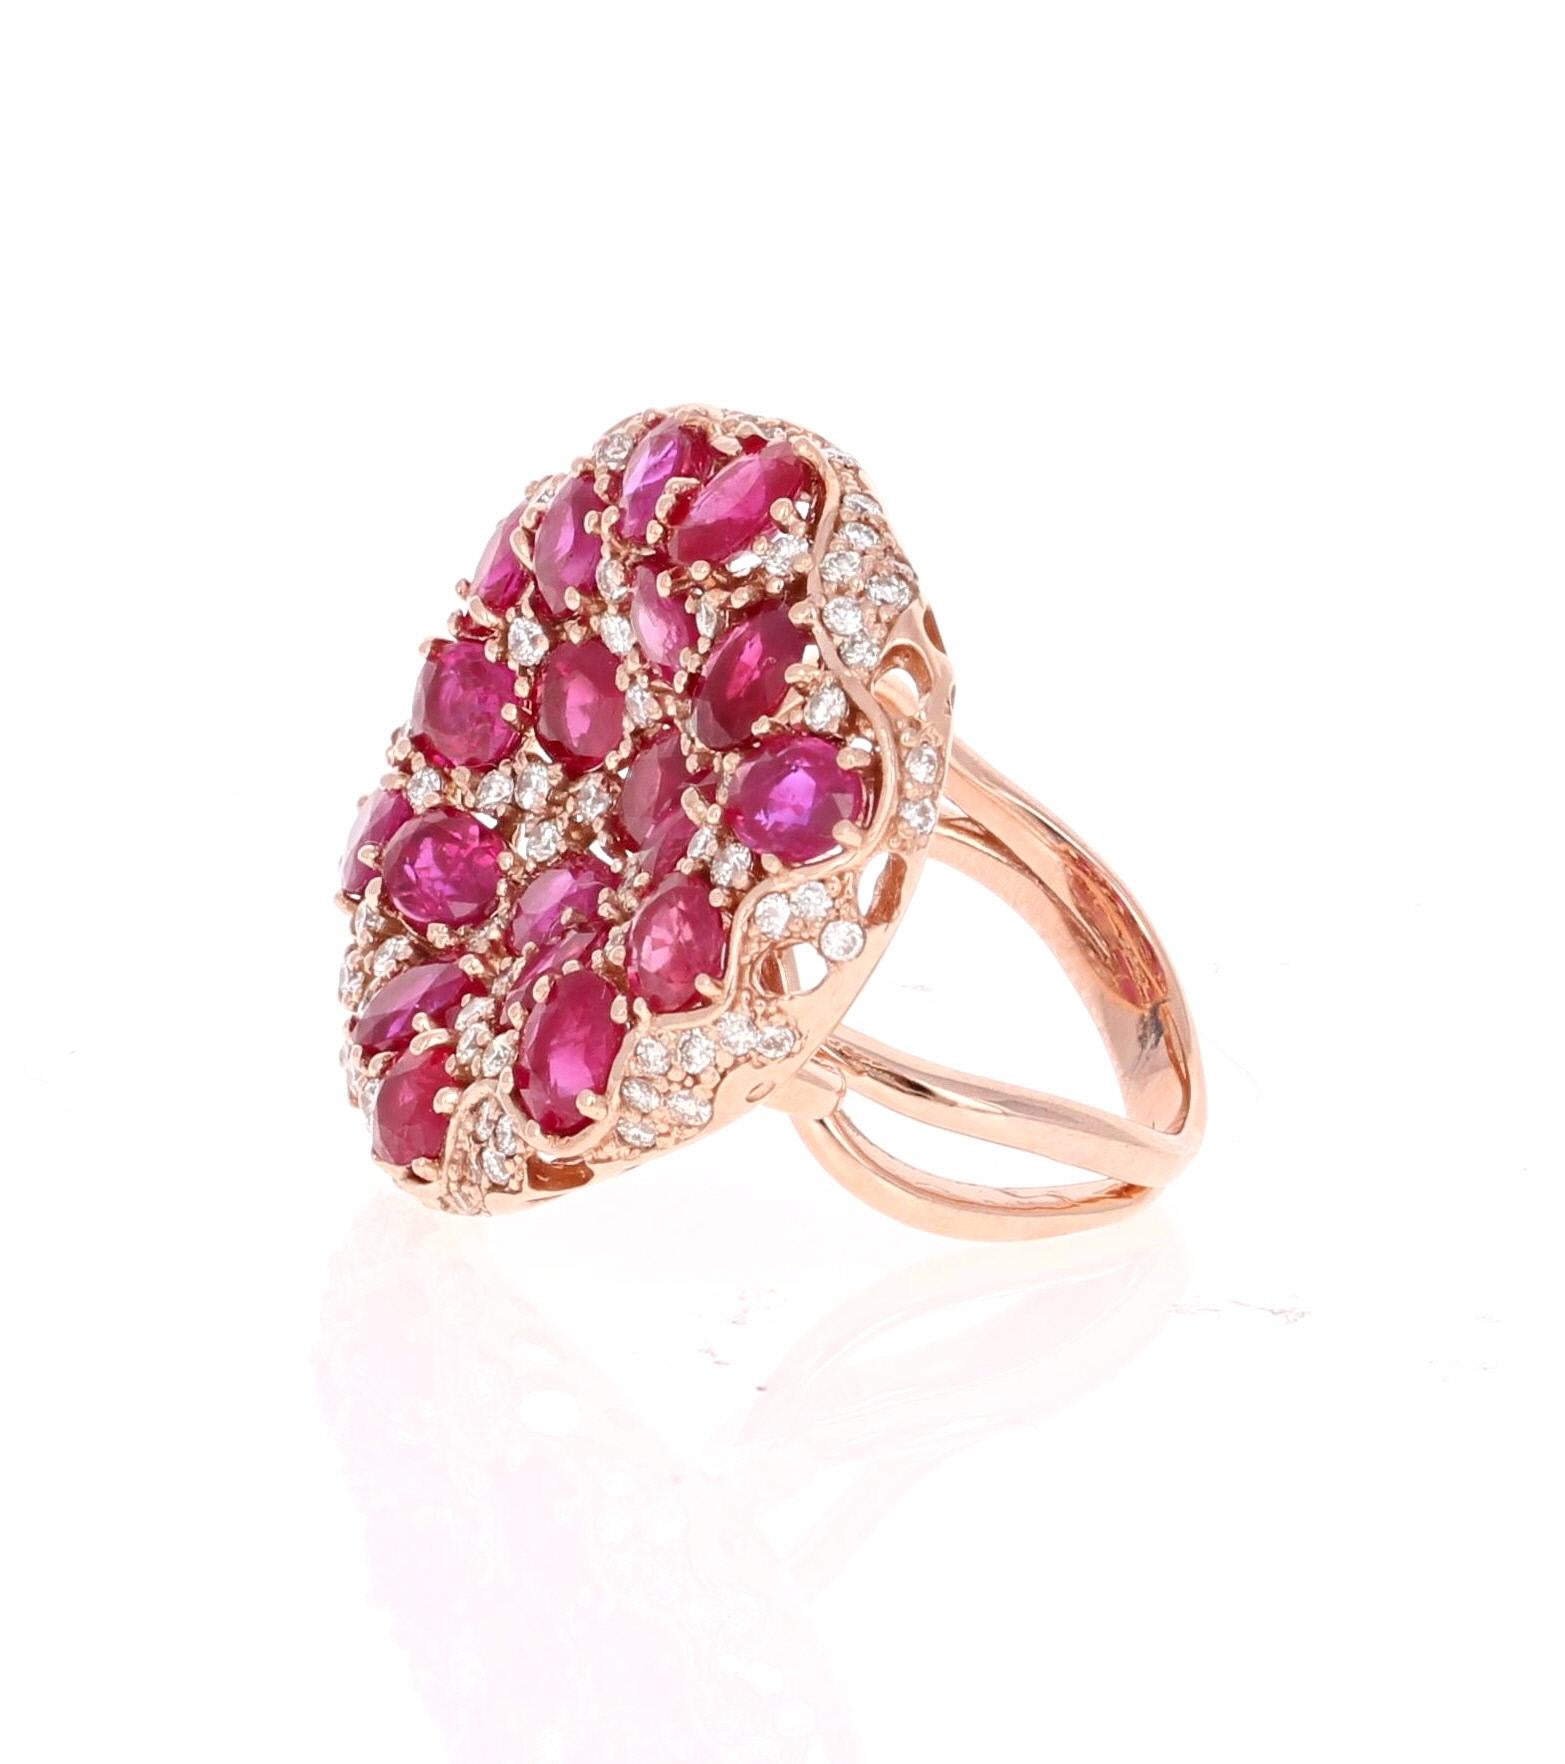 A Statement Ruby Diamond Ring that is GIA Certified. GIA Certificate Number is: 5191074174.

The ring has multiple Oval Cut Natural Red Rubies weighing 7.58 Carats and 90 Round Cut Diamonds embellished around weighing 1.02 Carats. The clarity and